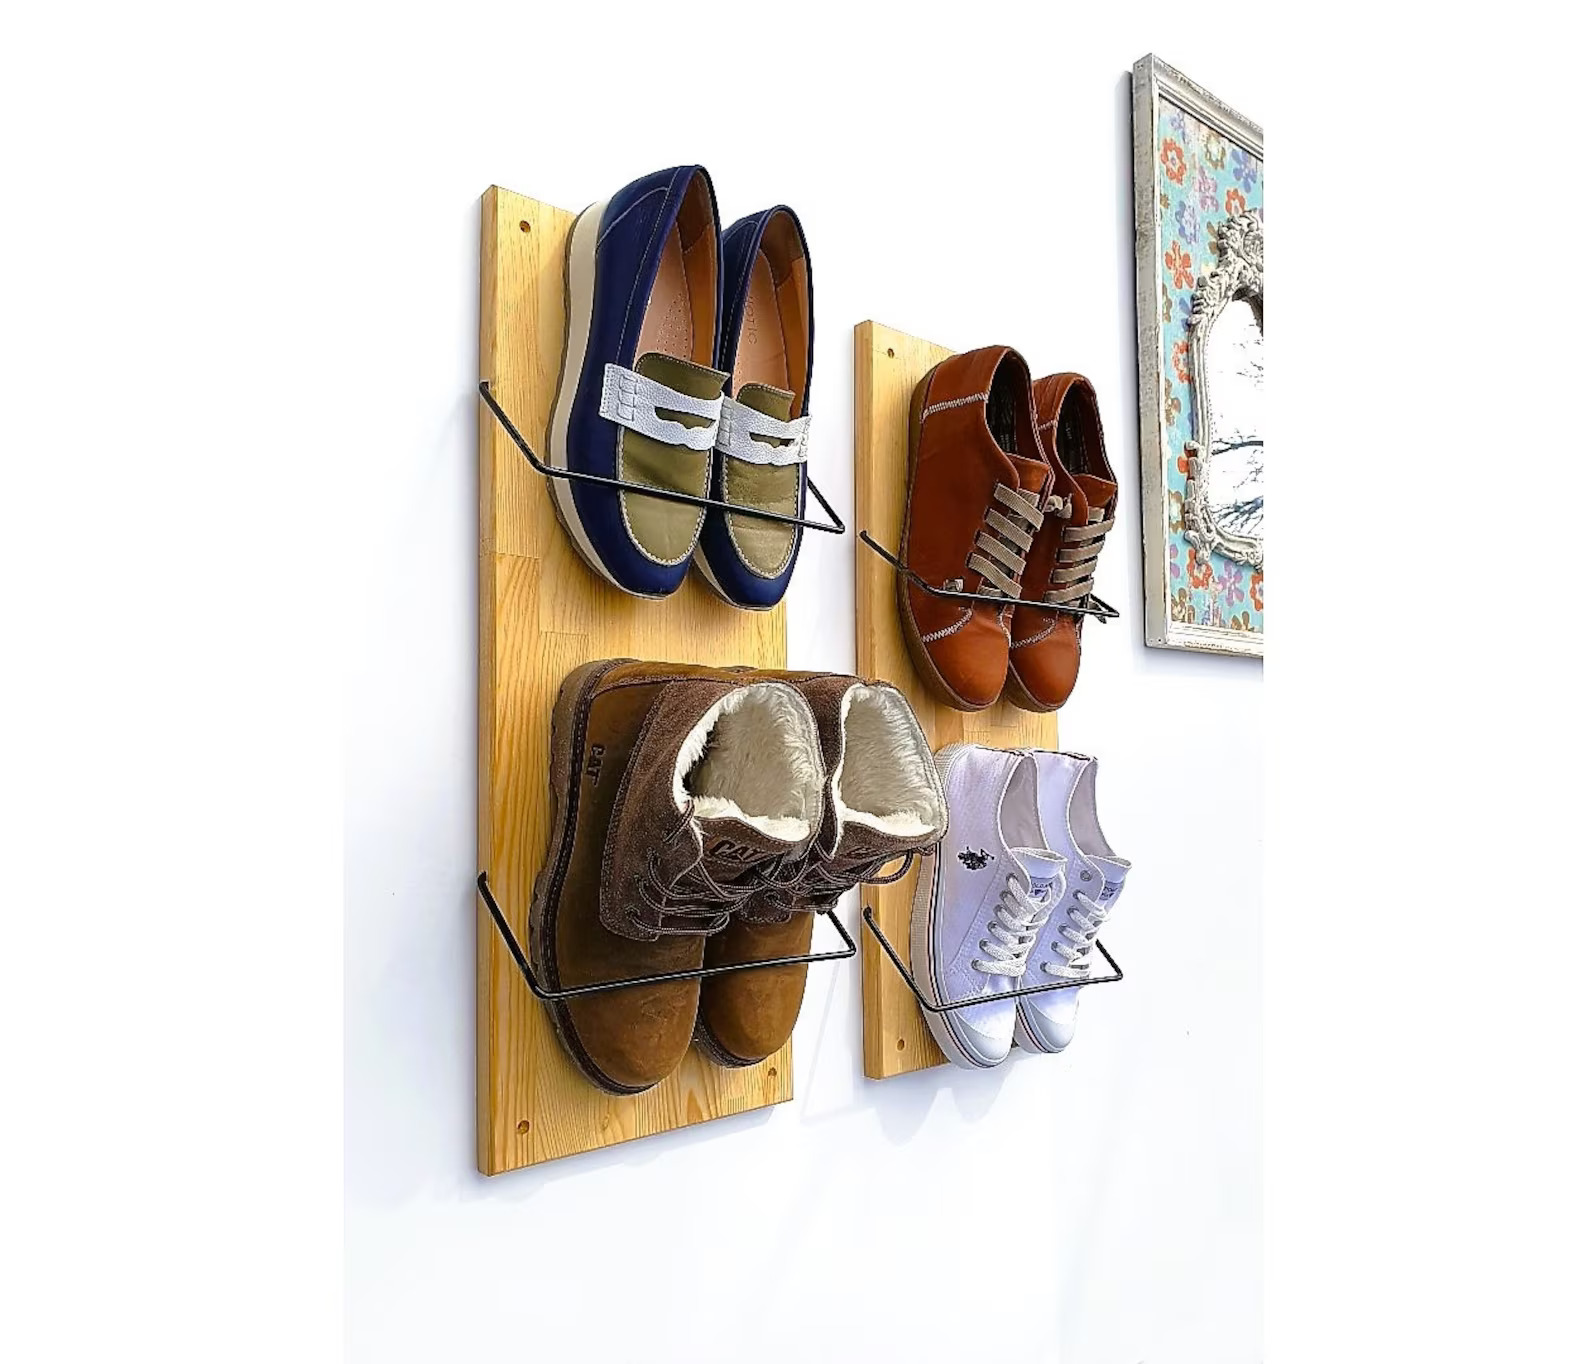 a wall mounted wooden shoe rack is a great way to save space by leveraging vertical storage space to organize shoes.